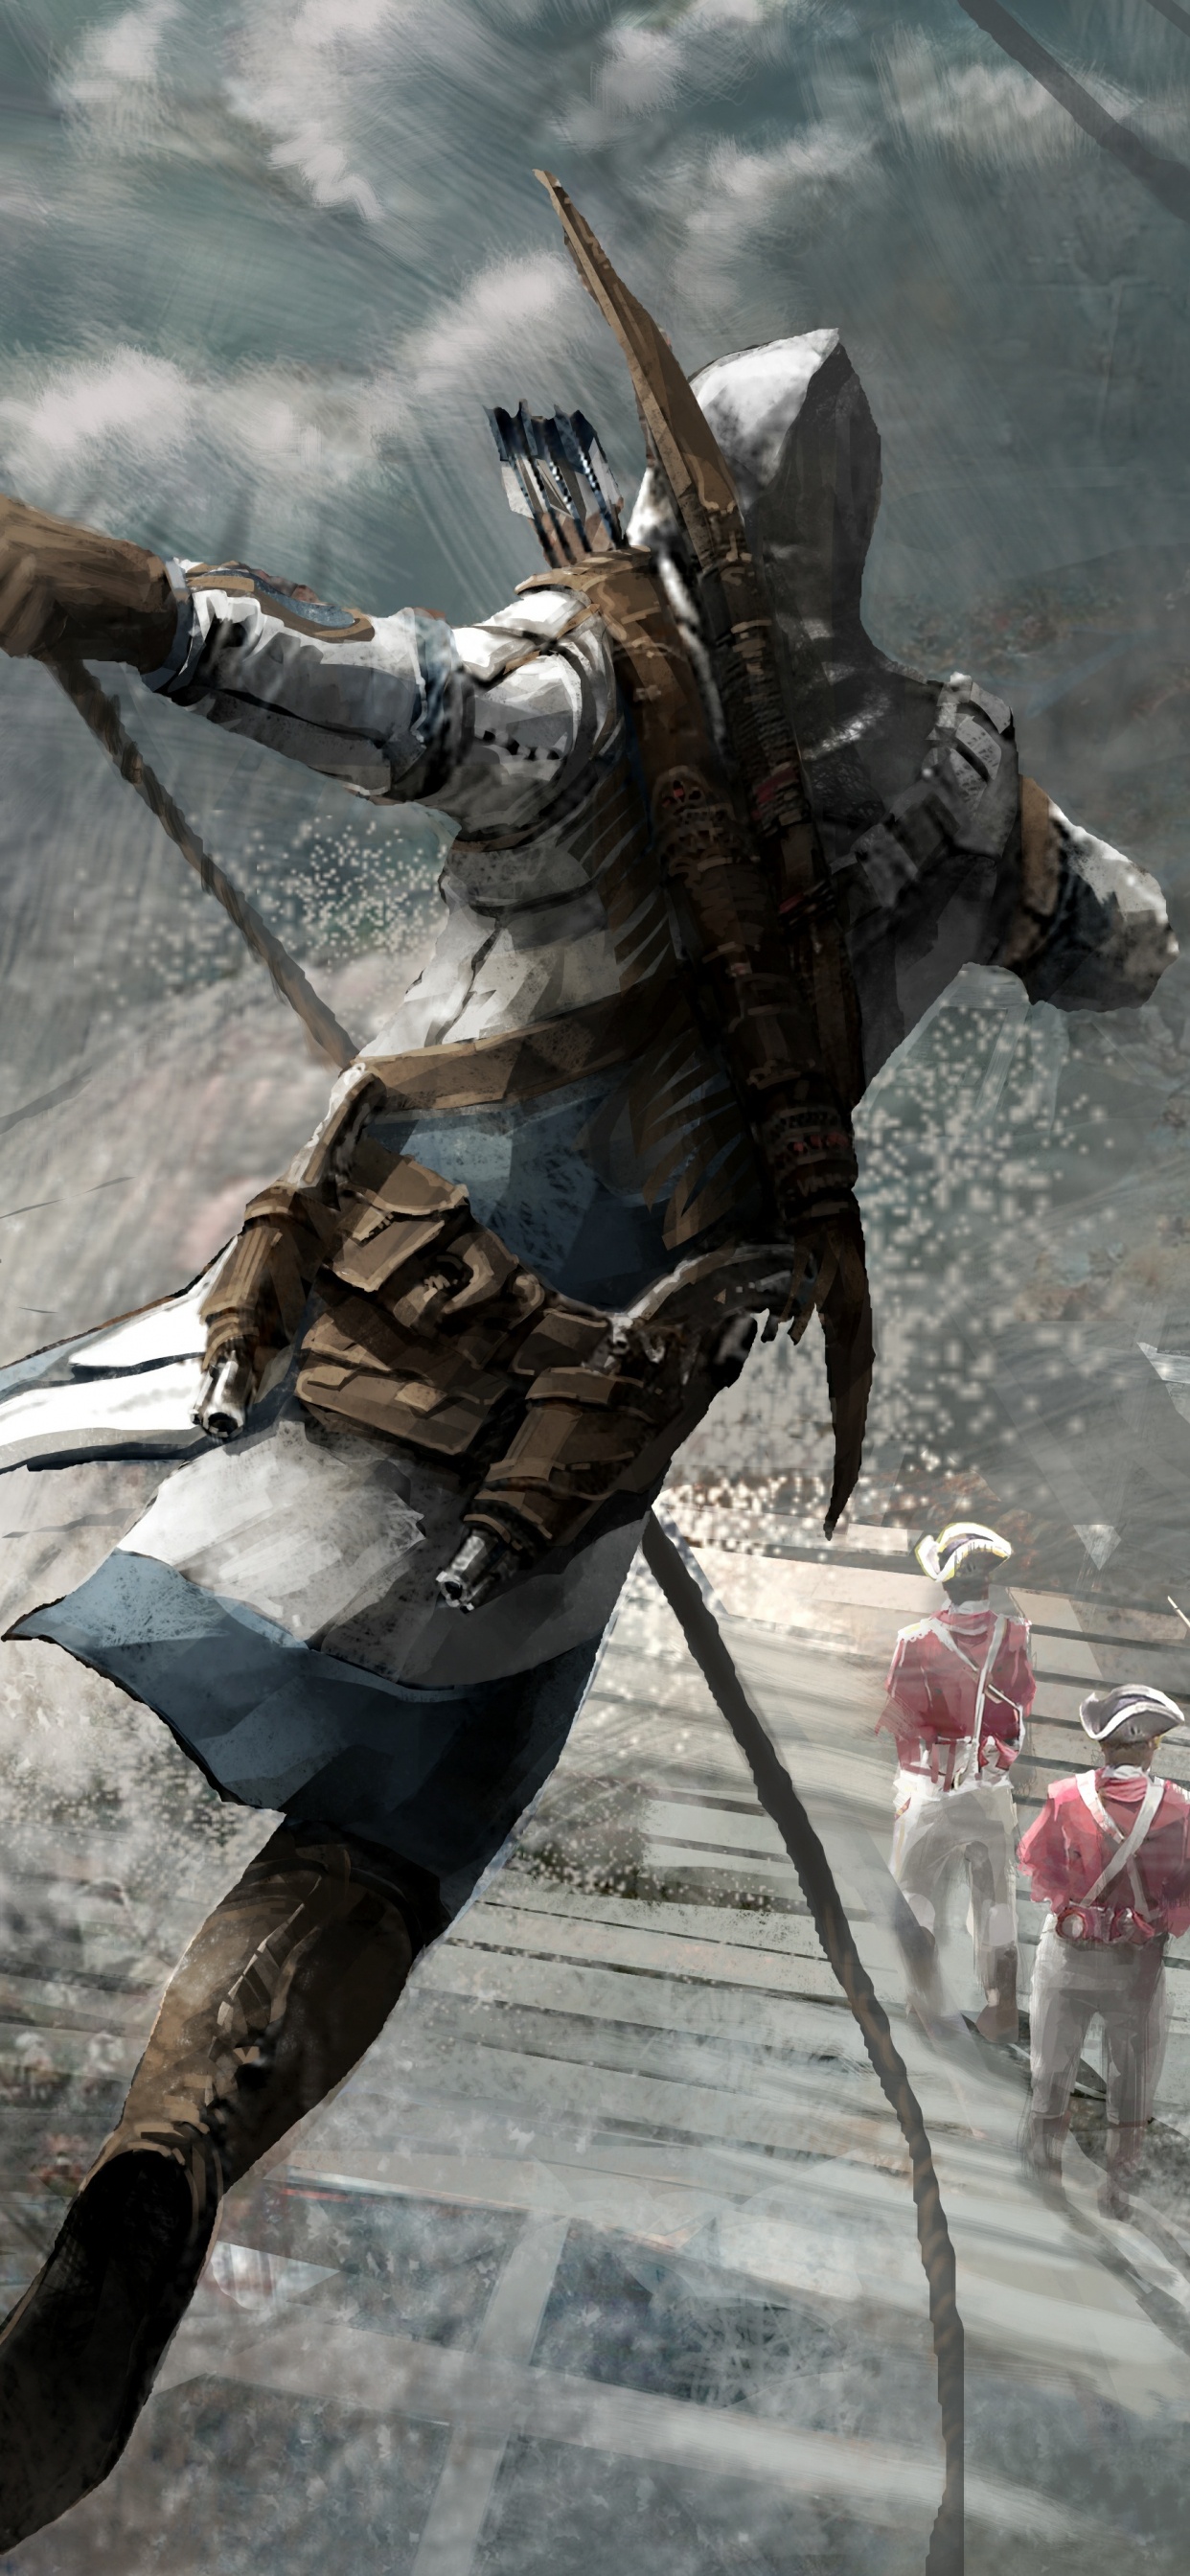 Assassins Creed III, Assassins Creed, Ezio Auditore, Connor Kenway, Ubisoft. Wallpaper in 1242x2688 Resolution